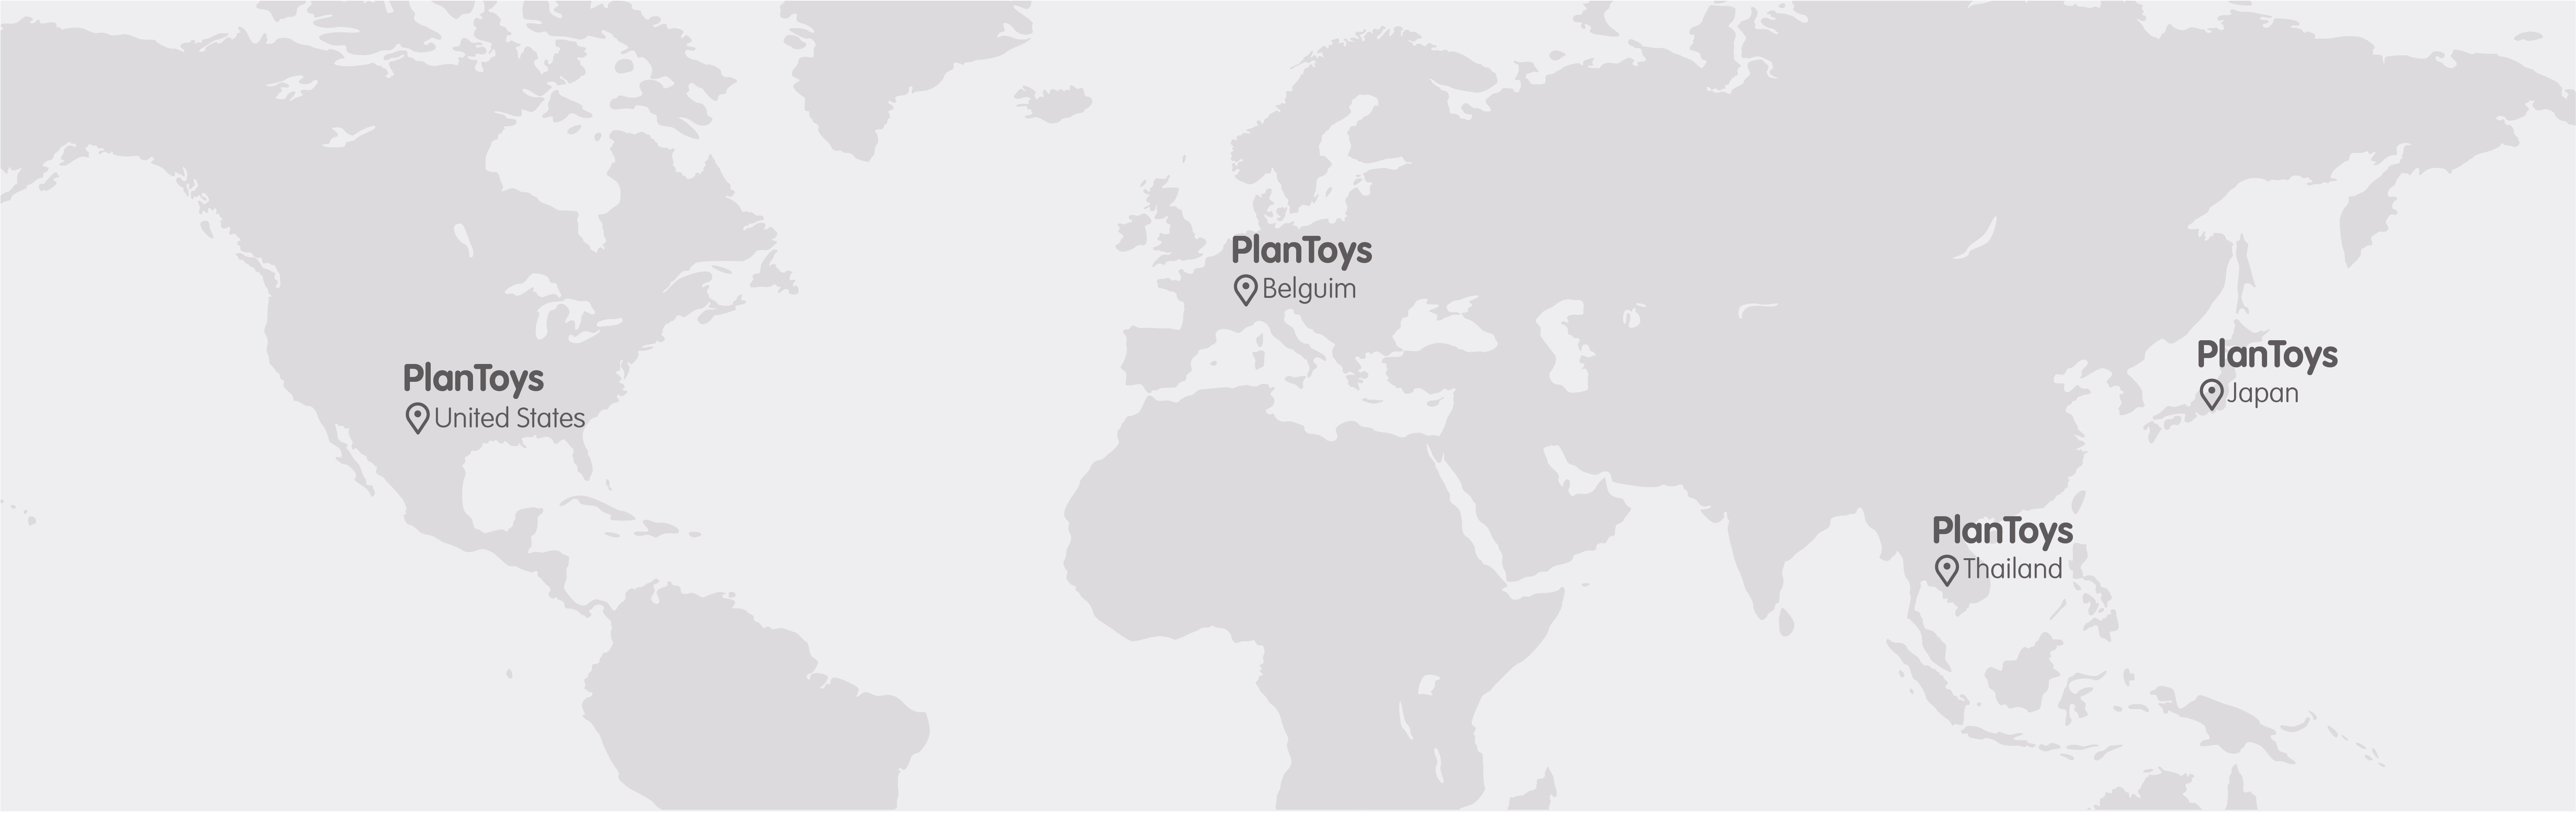 PlanToys Worldwide Offices